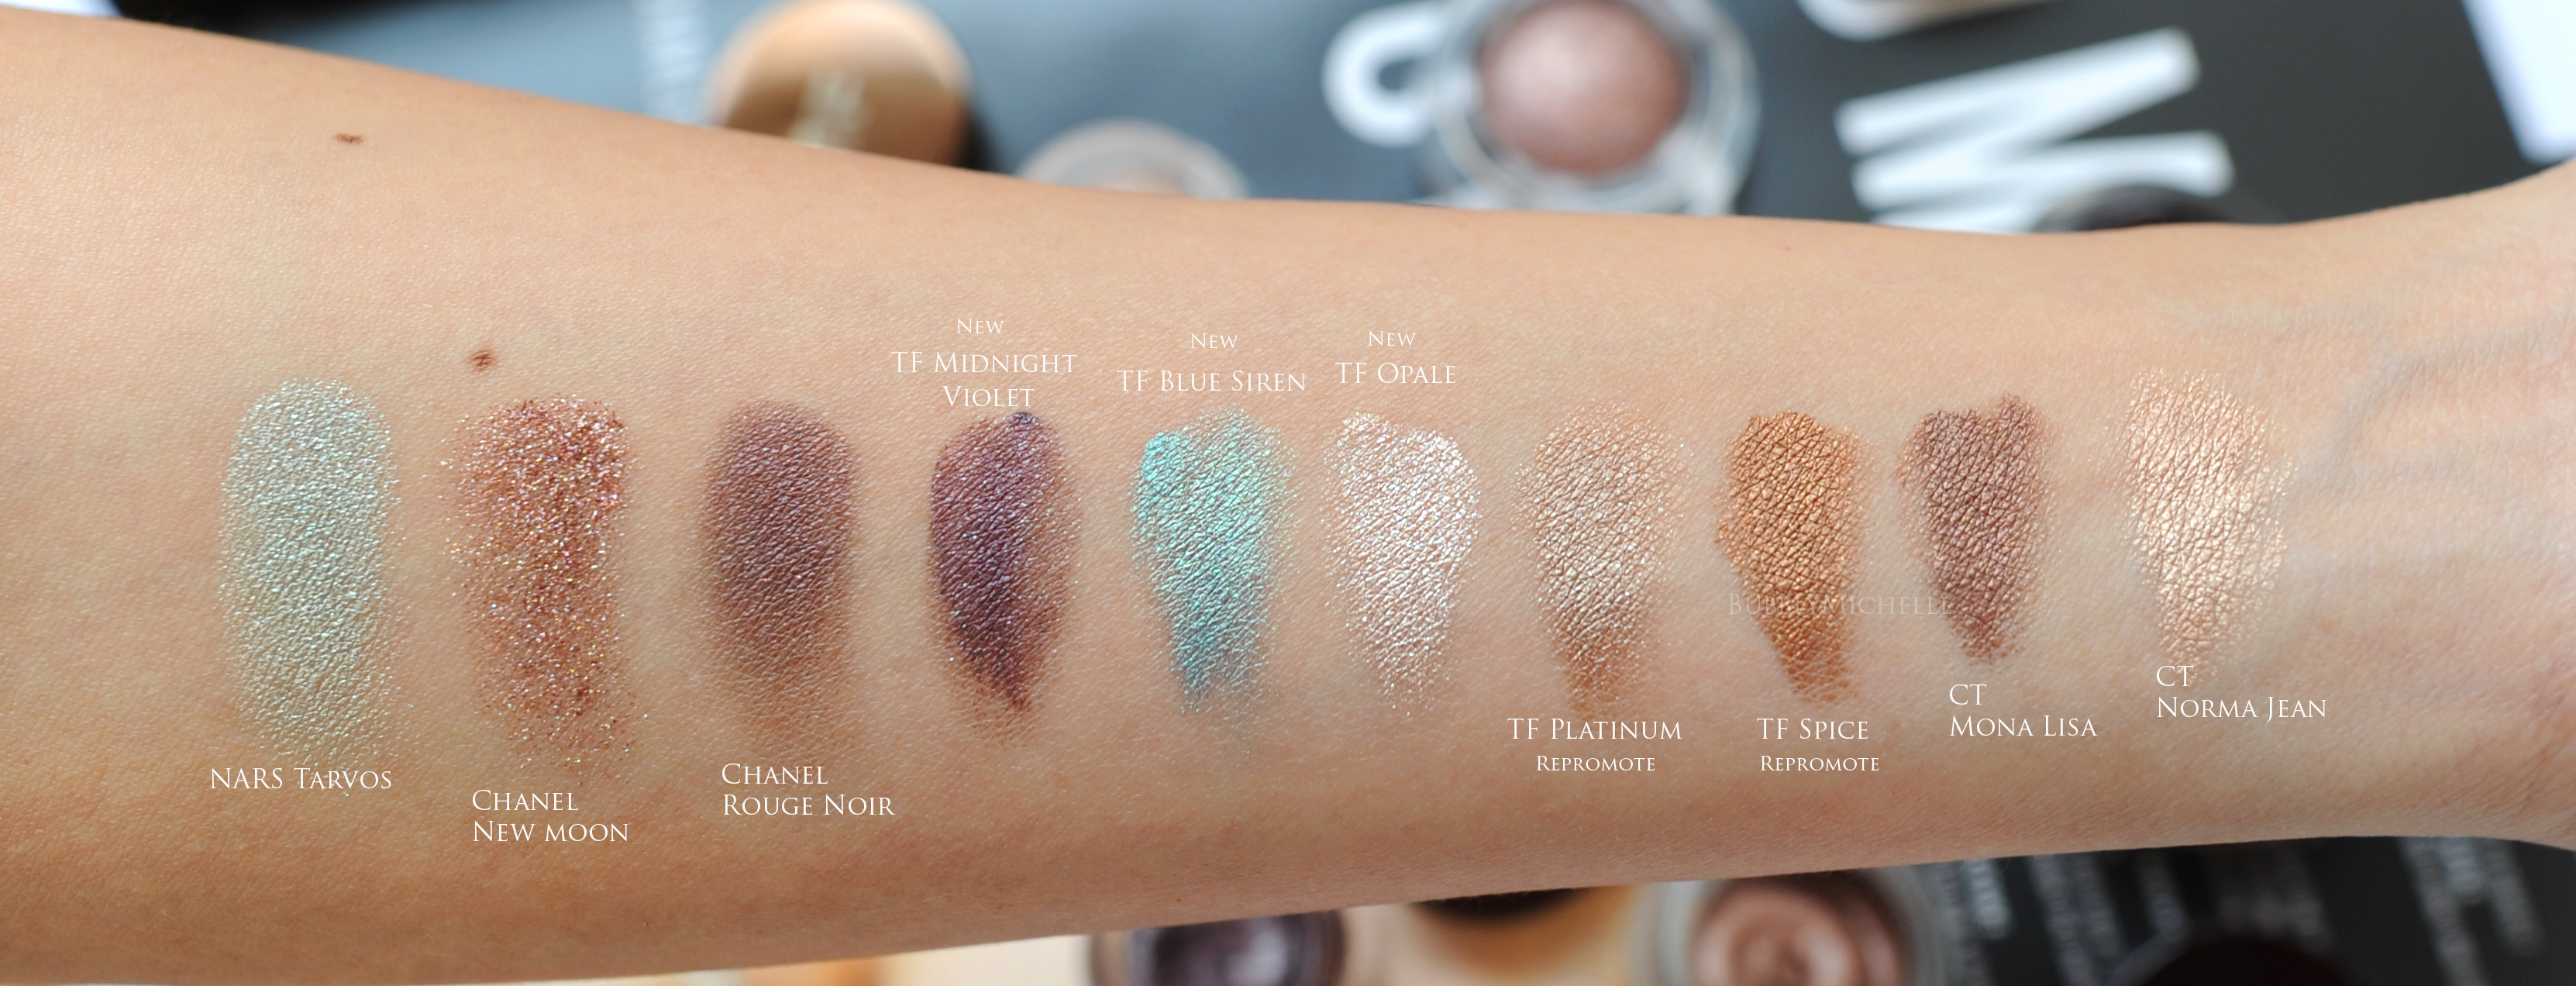 Tom Ford Cocoa Mirage Eyeshadow Quad Review, Swatches ...